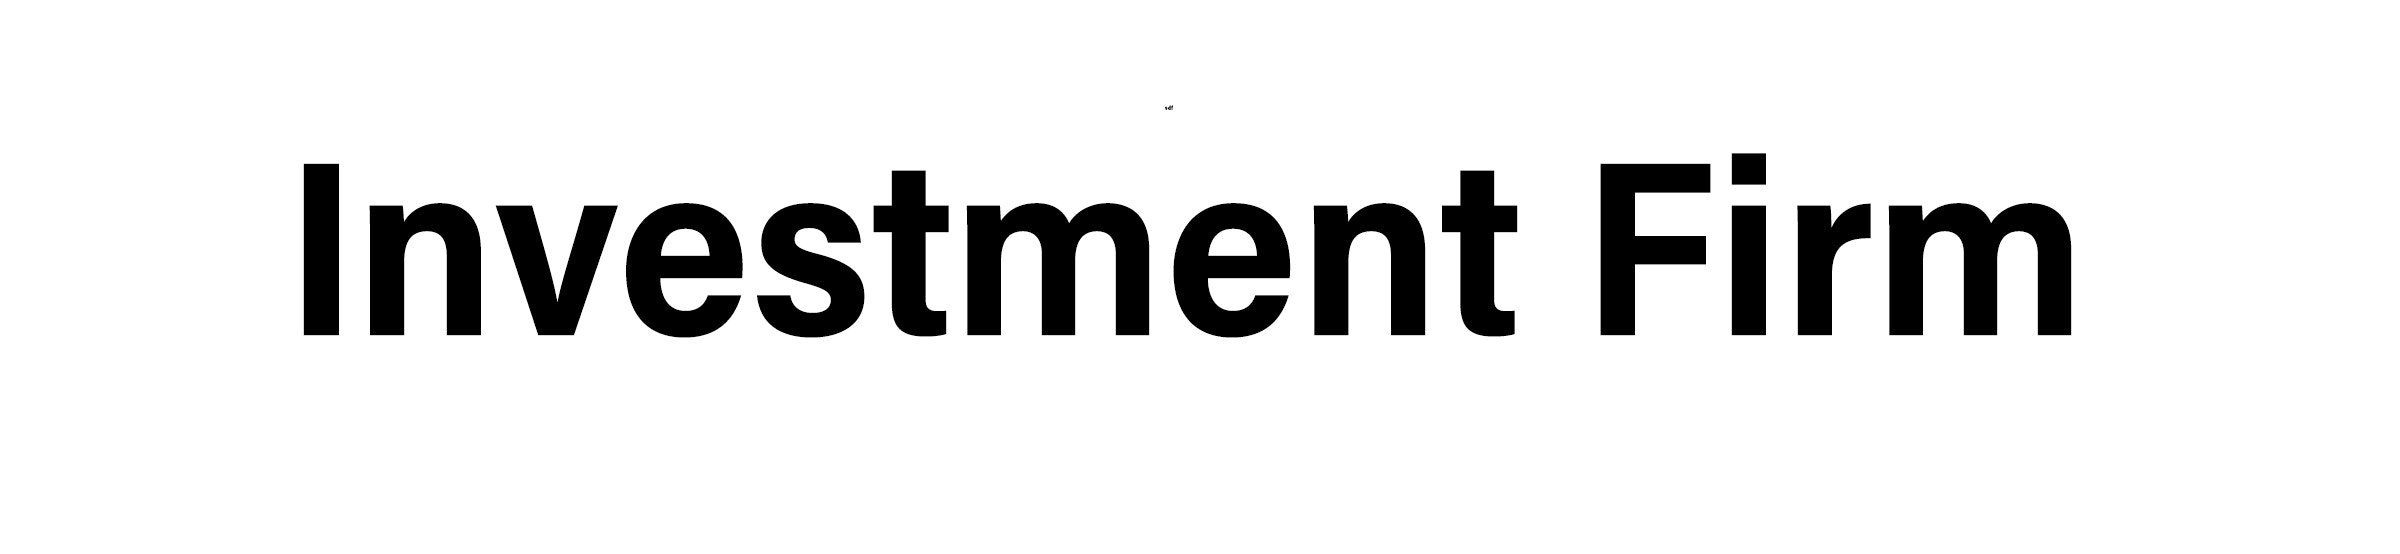 Investment Firm